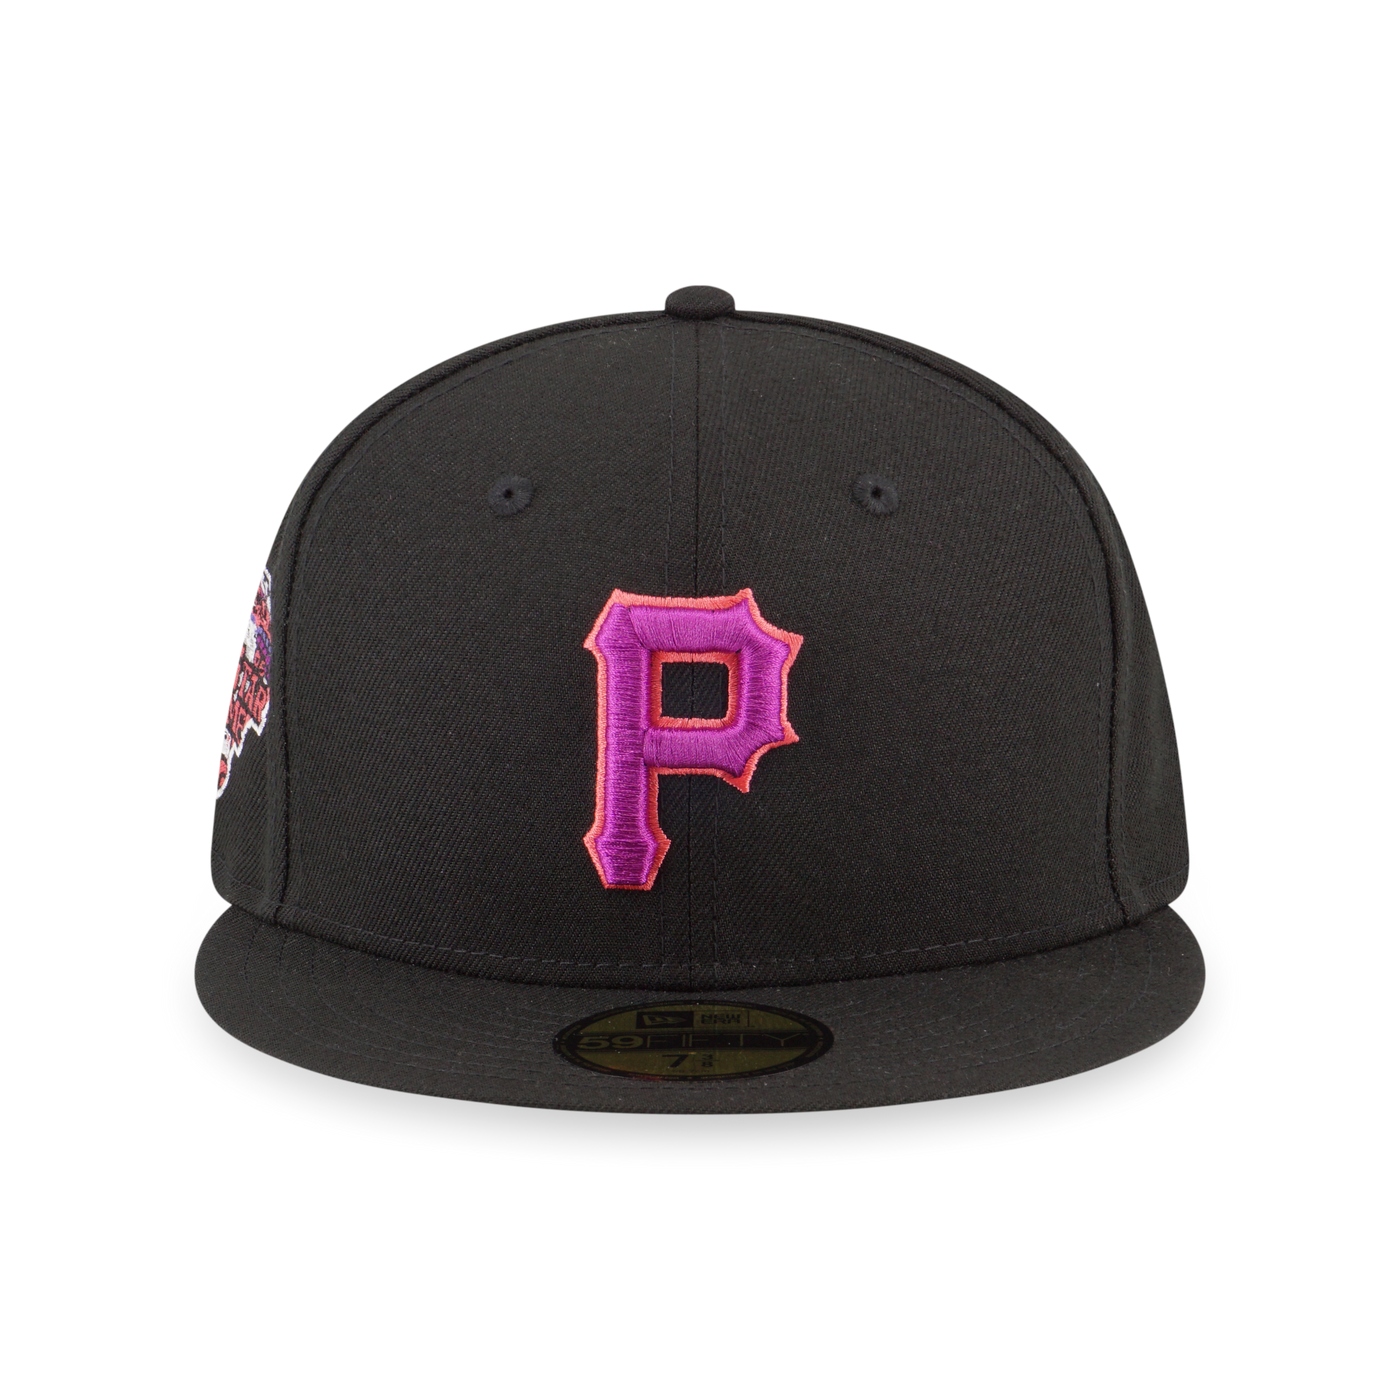 59FIFTY PACK - HALLOWEEN PITTSBURGH PIRATES BLACK 59FIFTY CAP